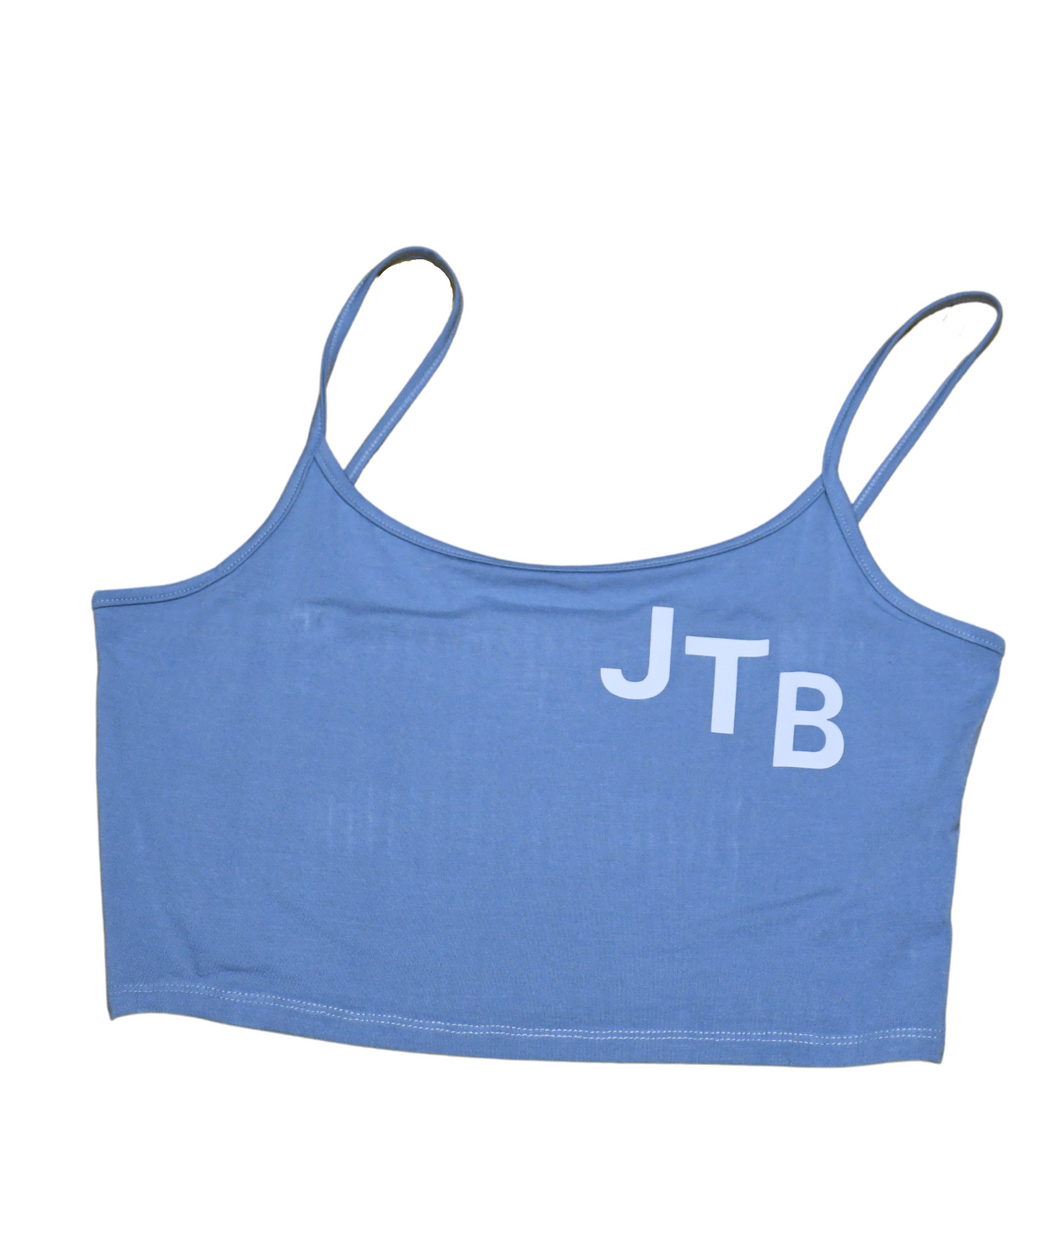 JVNO The Bard #IMWITHTHEDOGS CropTop